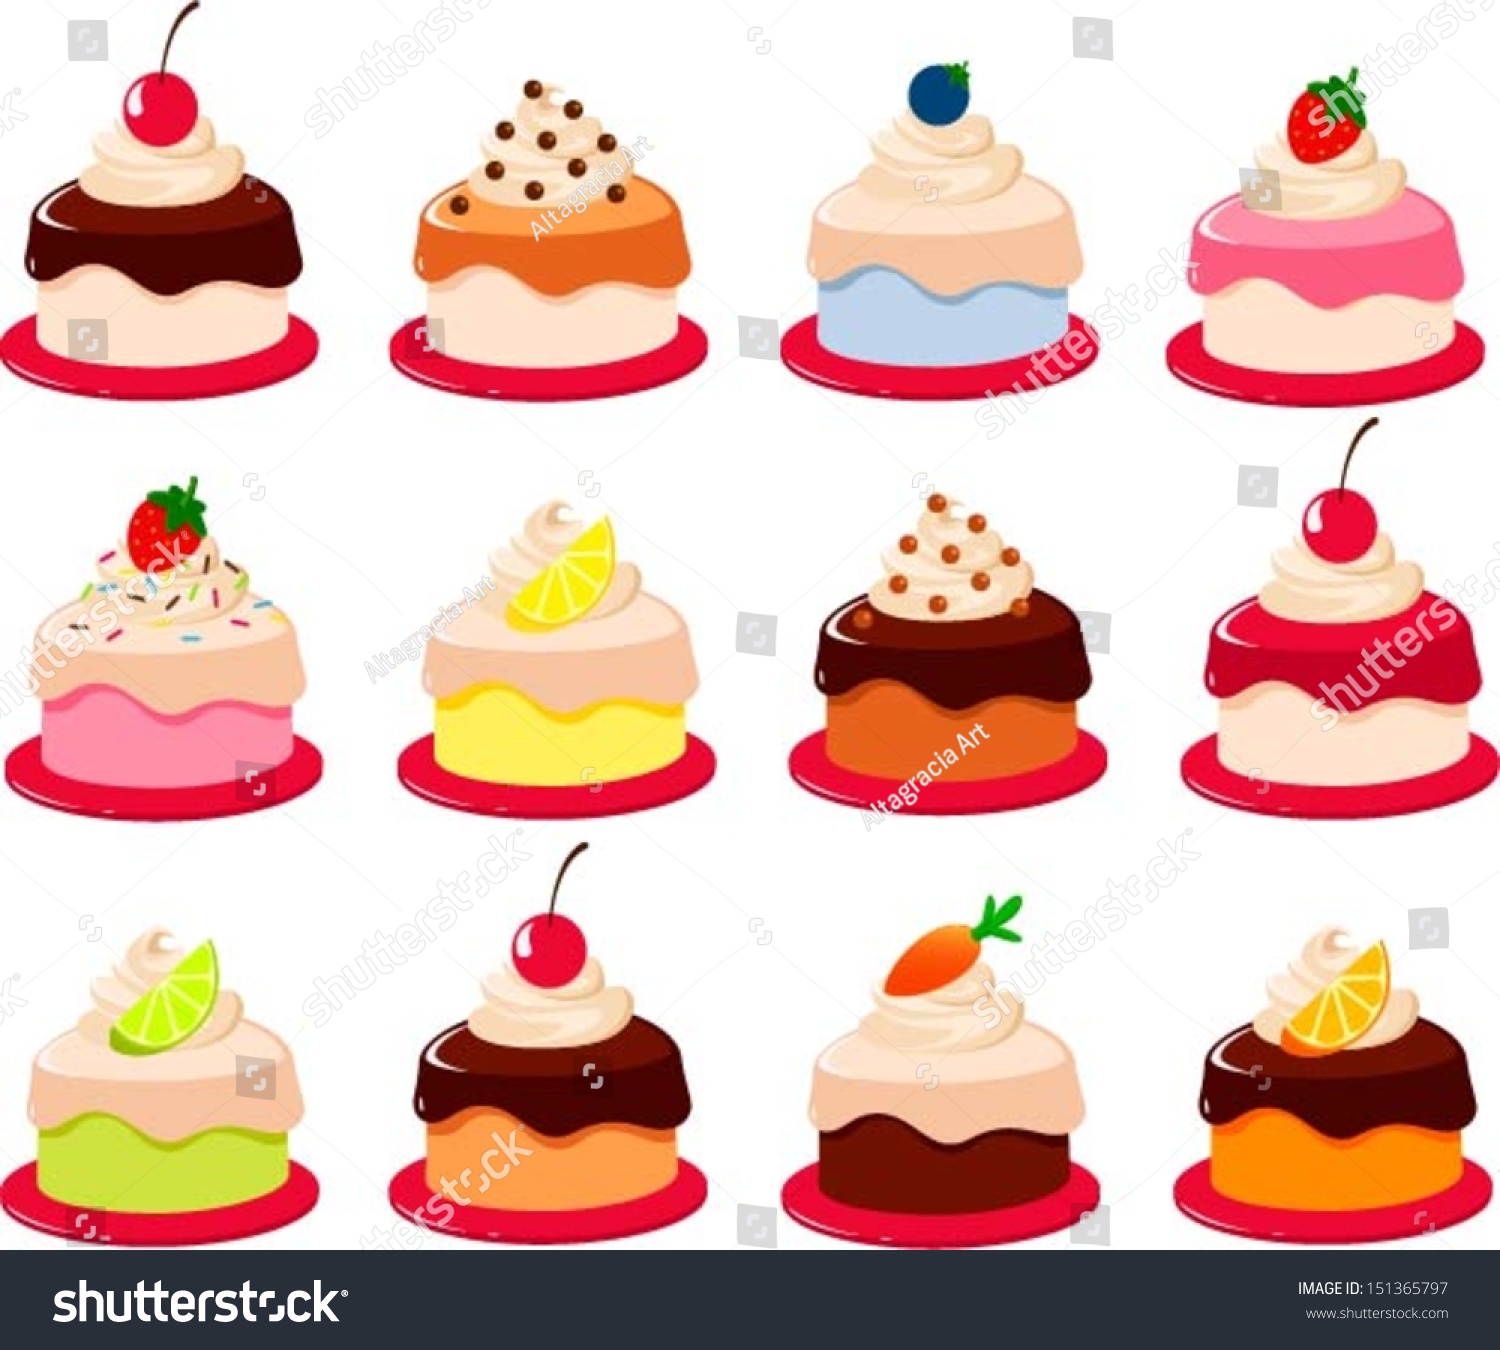 SVG of Vector illustration of various cartoon style pieces of cake. svg